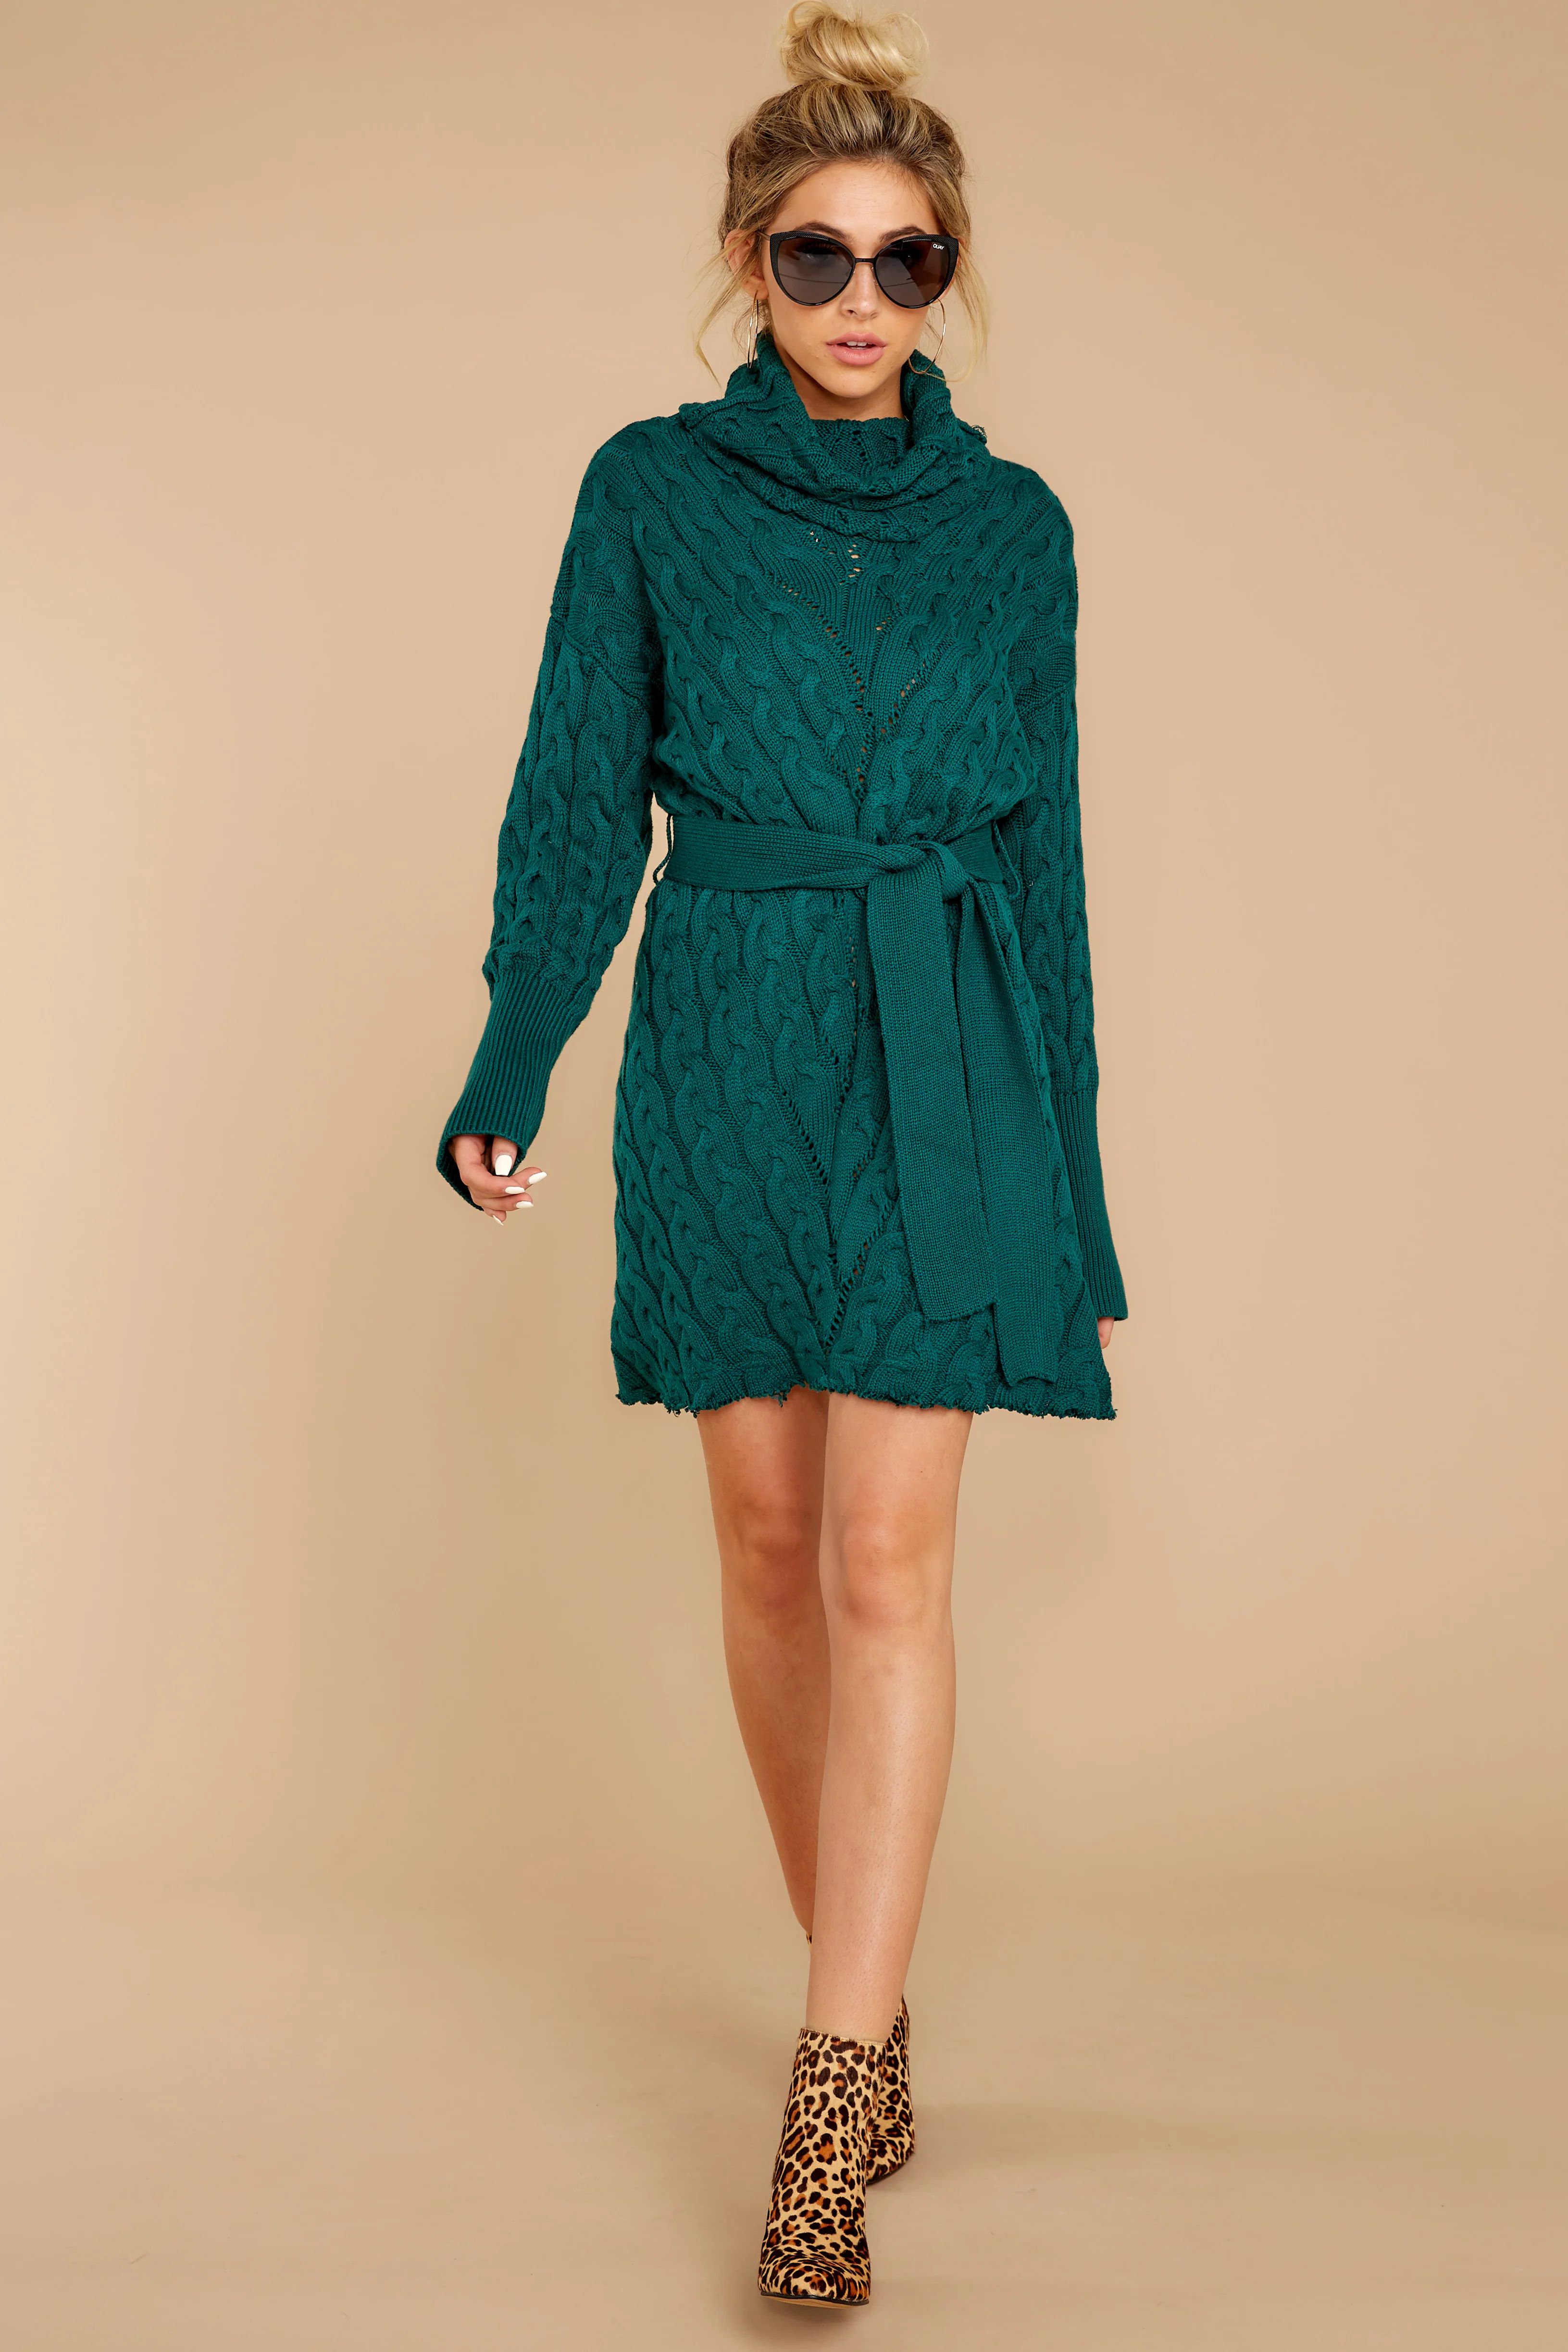 Ready Willing And Cable Knit Teal Green Sweater Dress | Red Dress 